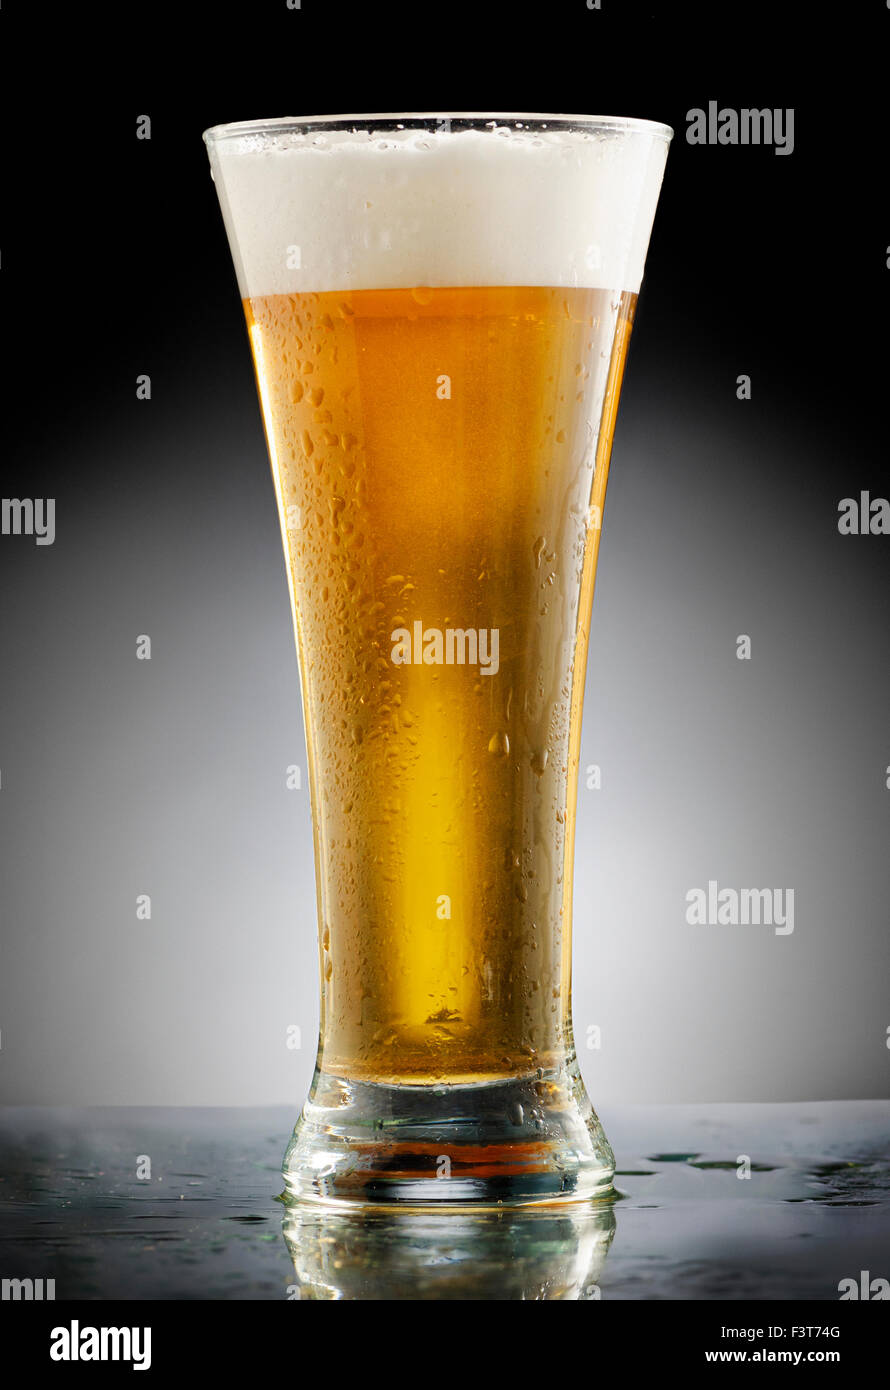 Glass of beer on black background Stock Photo